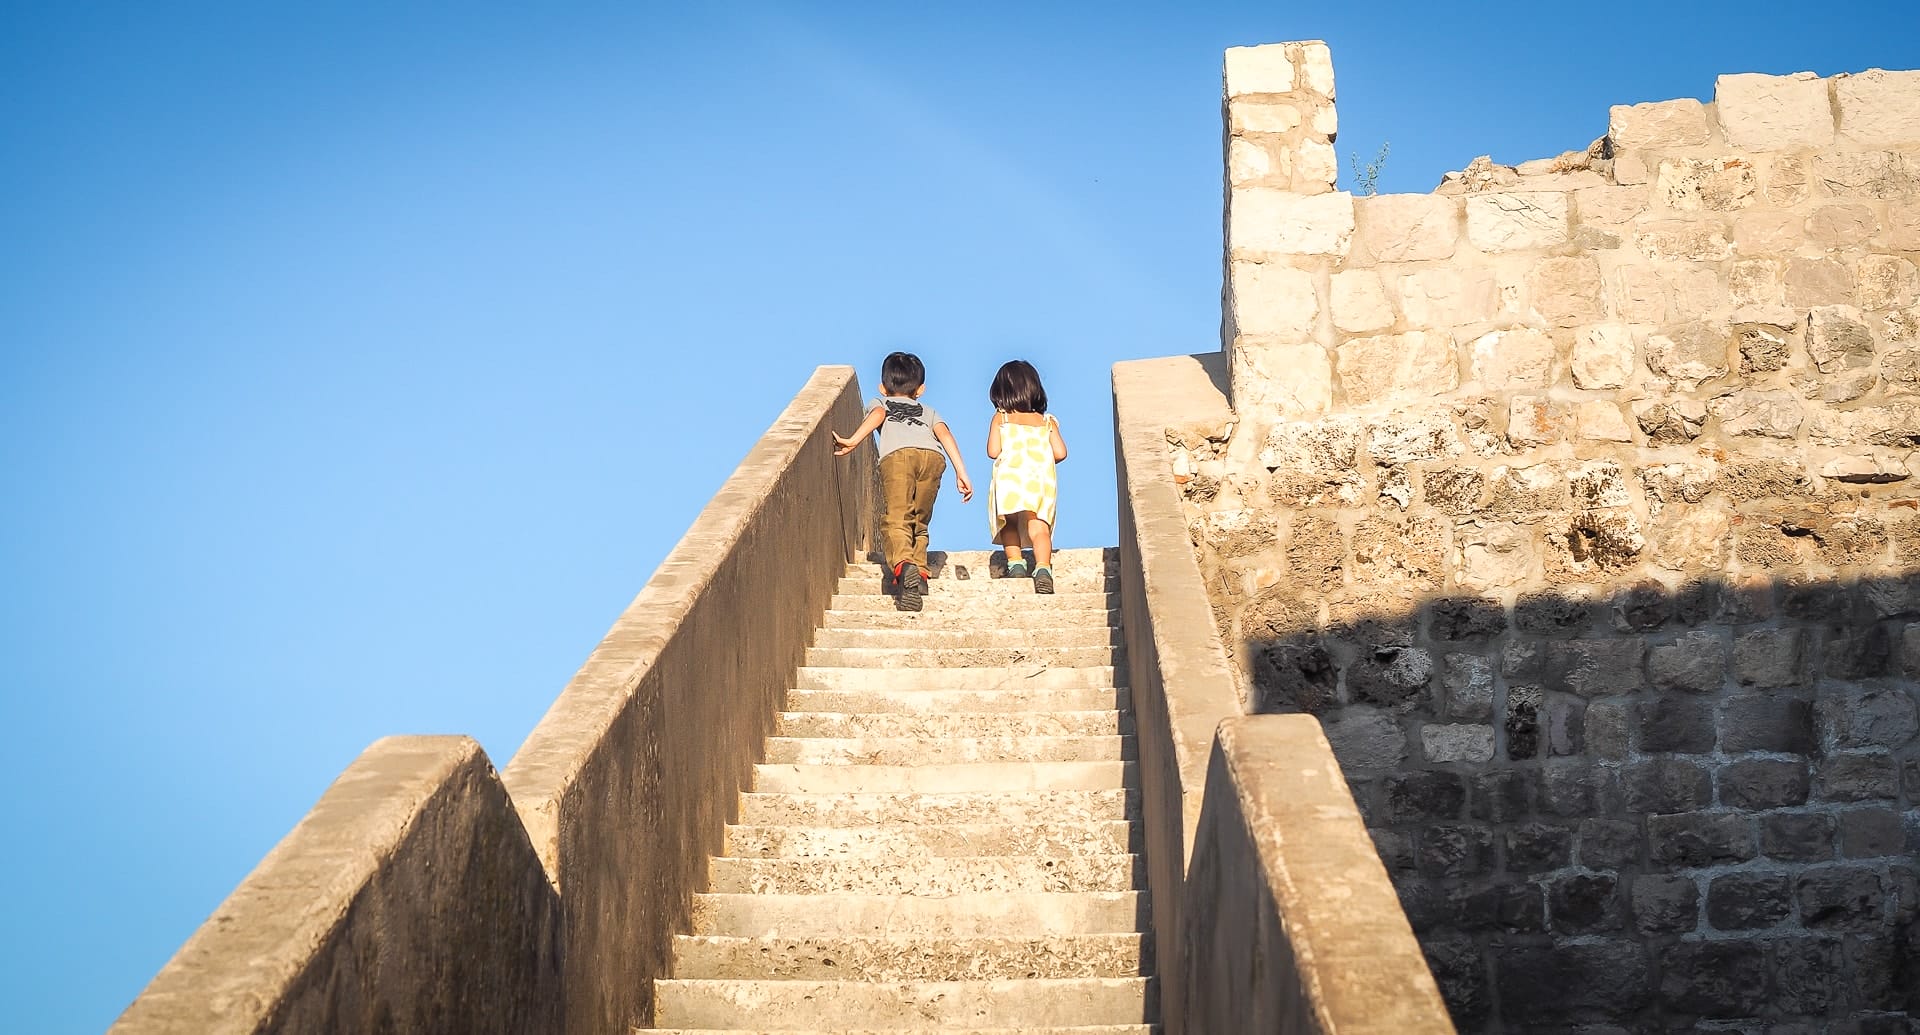 Walking the city walls of Dubrovnik is one of the best things to do in Croatia with kids